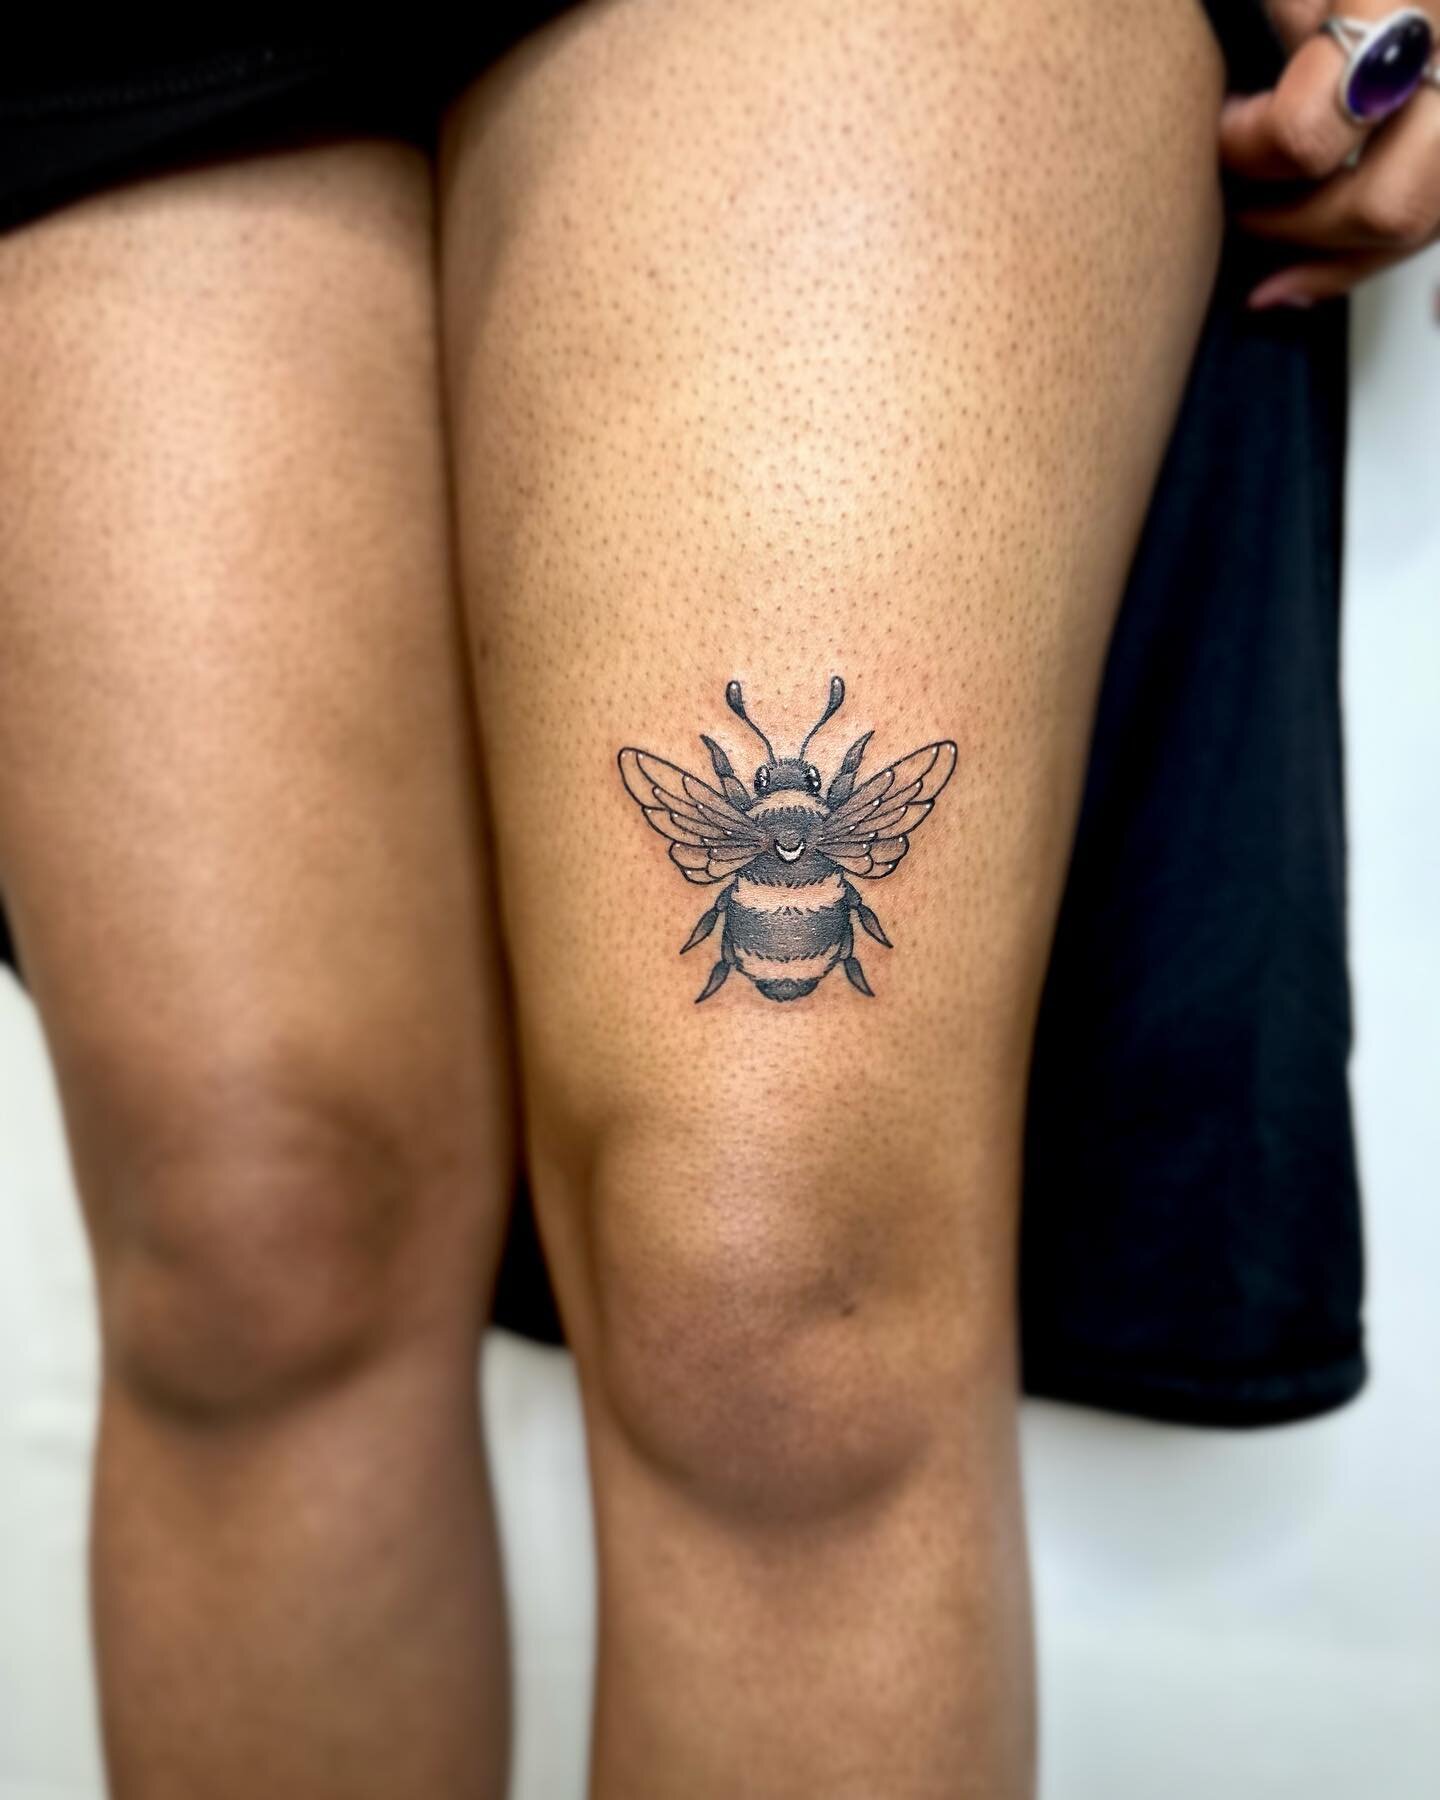 It&rsquo;s the BEES KNEES! 🐝🥳 
Message me to get a spot in for January, your idea or mine love collaborating on ideas!! 
&bull;
&bull;
&bull;
&bull;
&bull;
&bull;
&bull;
#beesknees #beetattoo #blackandgreytattoo #sftattoo #sftattooartist #tradition